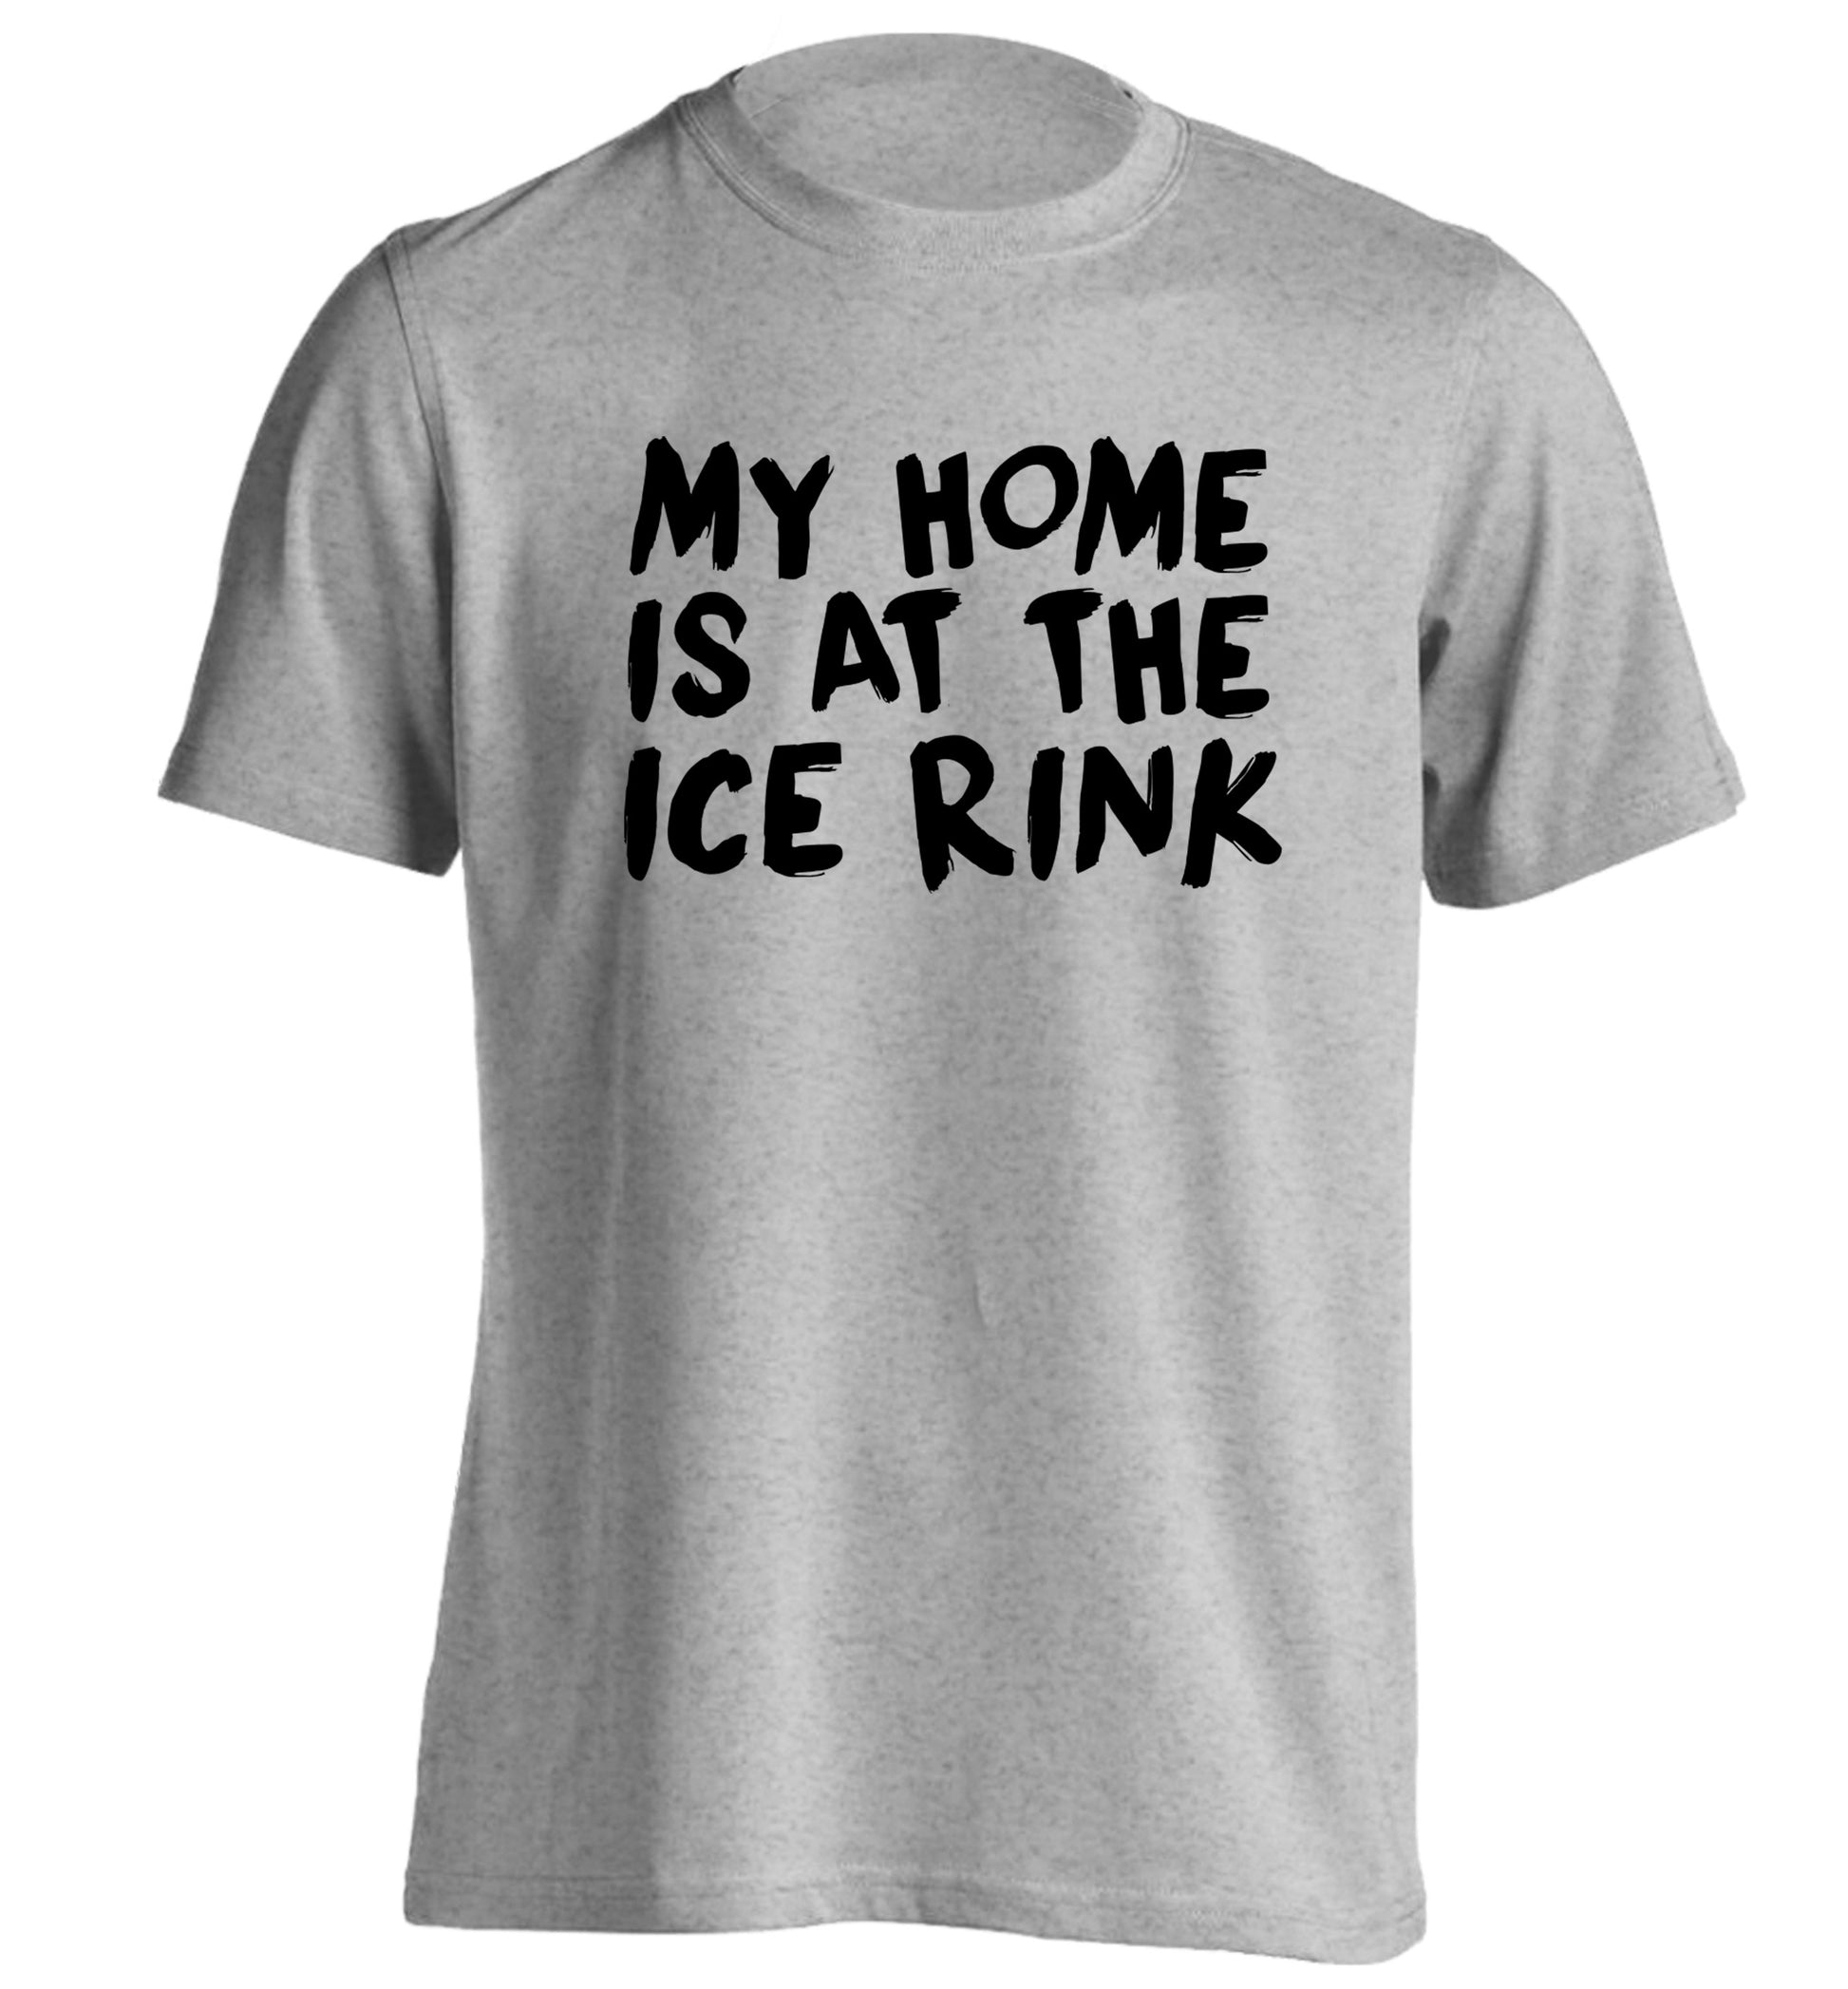 My home is at the ice rink adults unisex grey Tshirt 2XL